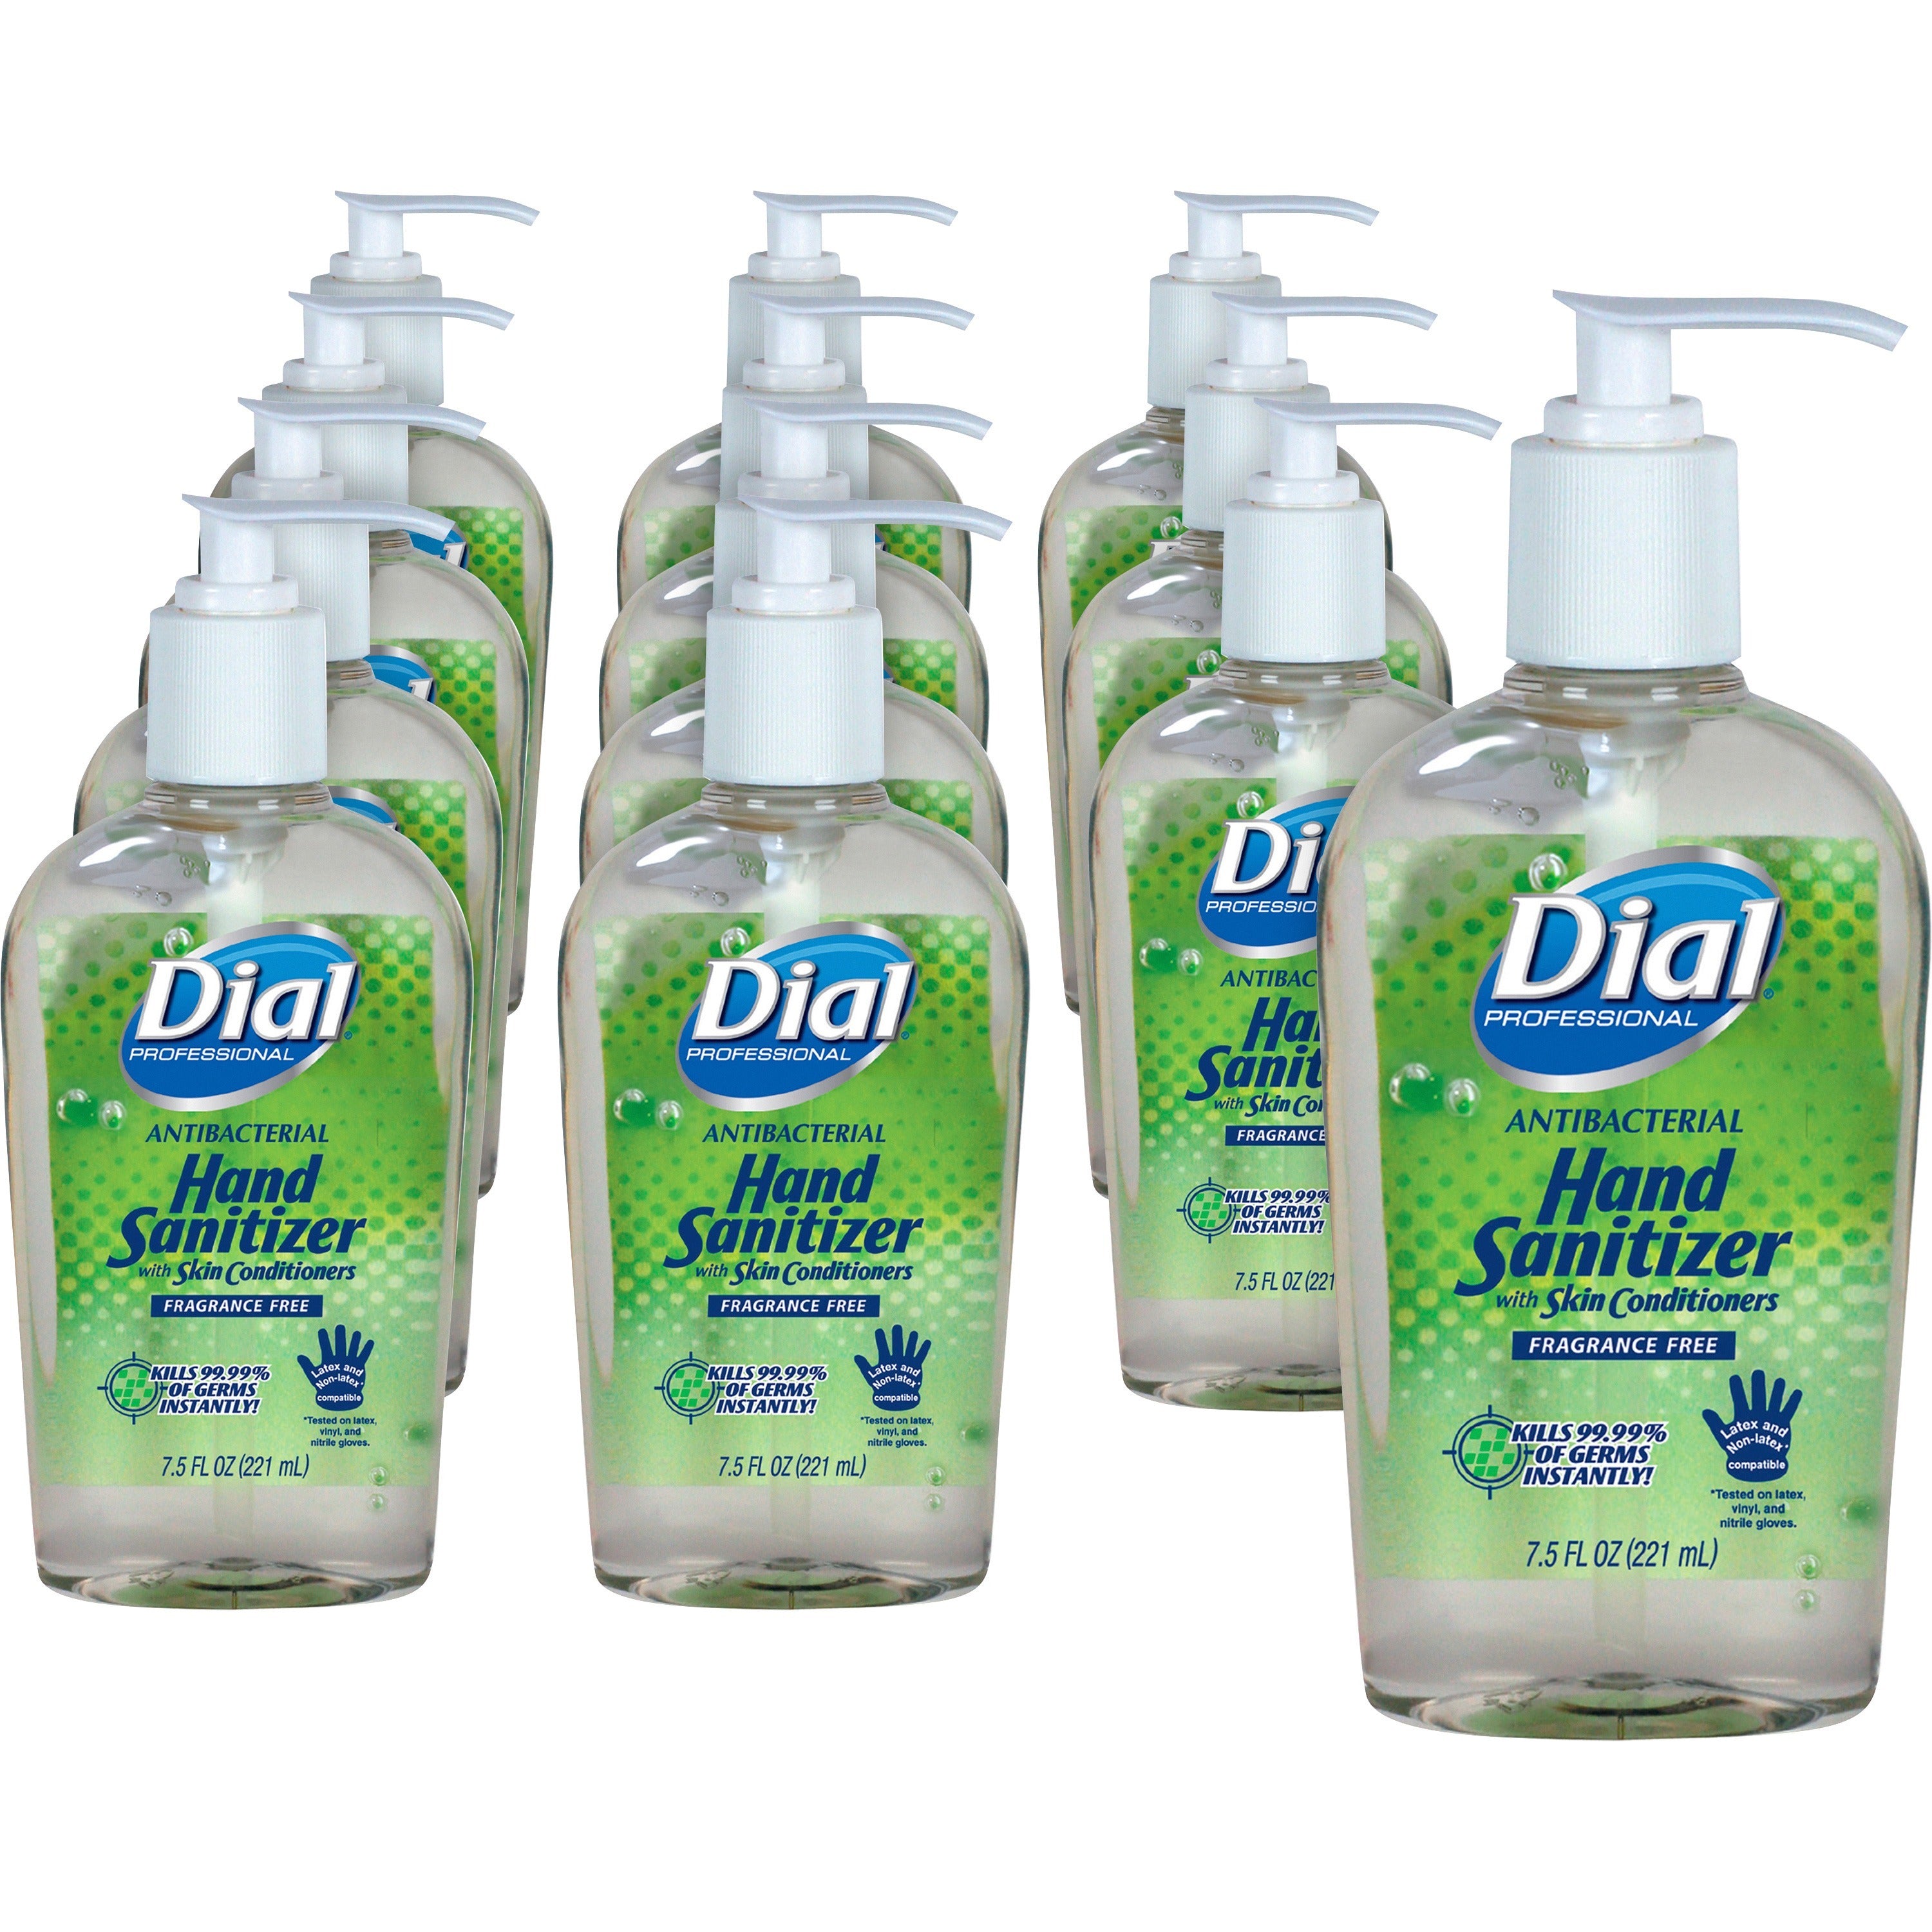 dial-hand-sanitizer-75-fl-oz-2218-ml-pump-bottle-dispenser-kill-germs-bacteria-remover-mold-remover-yeast-remover-hand-moisturizing-clear-fragrance-free-dye-free-12-carton_dia01585ct - 1